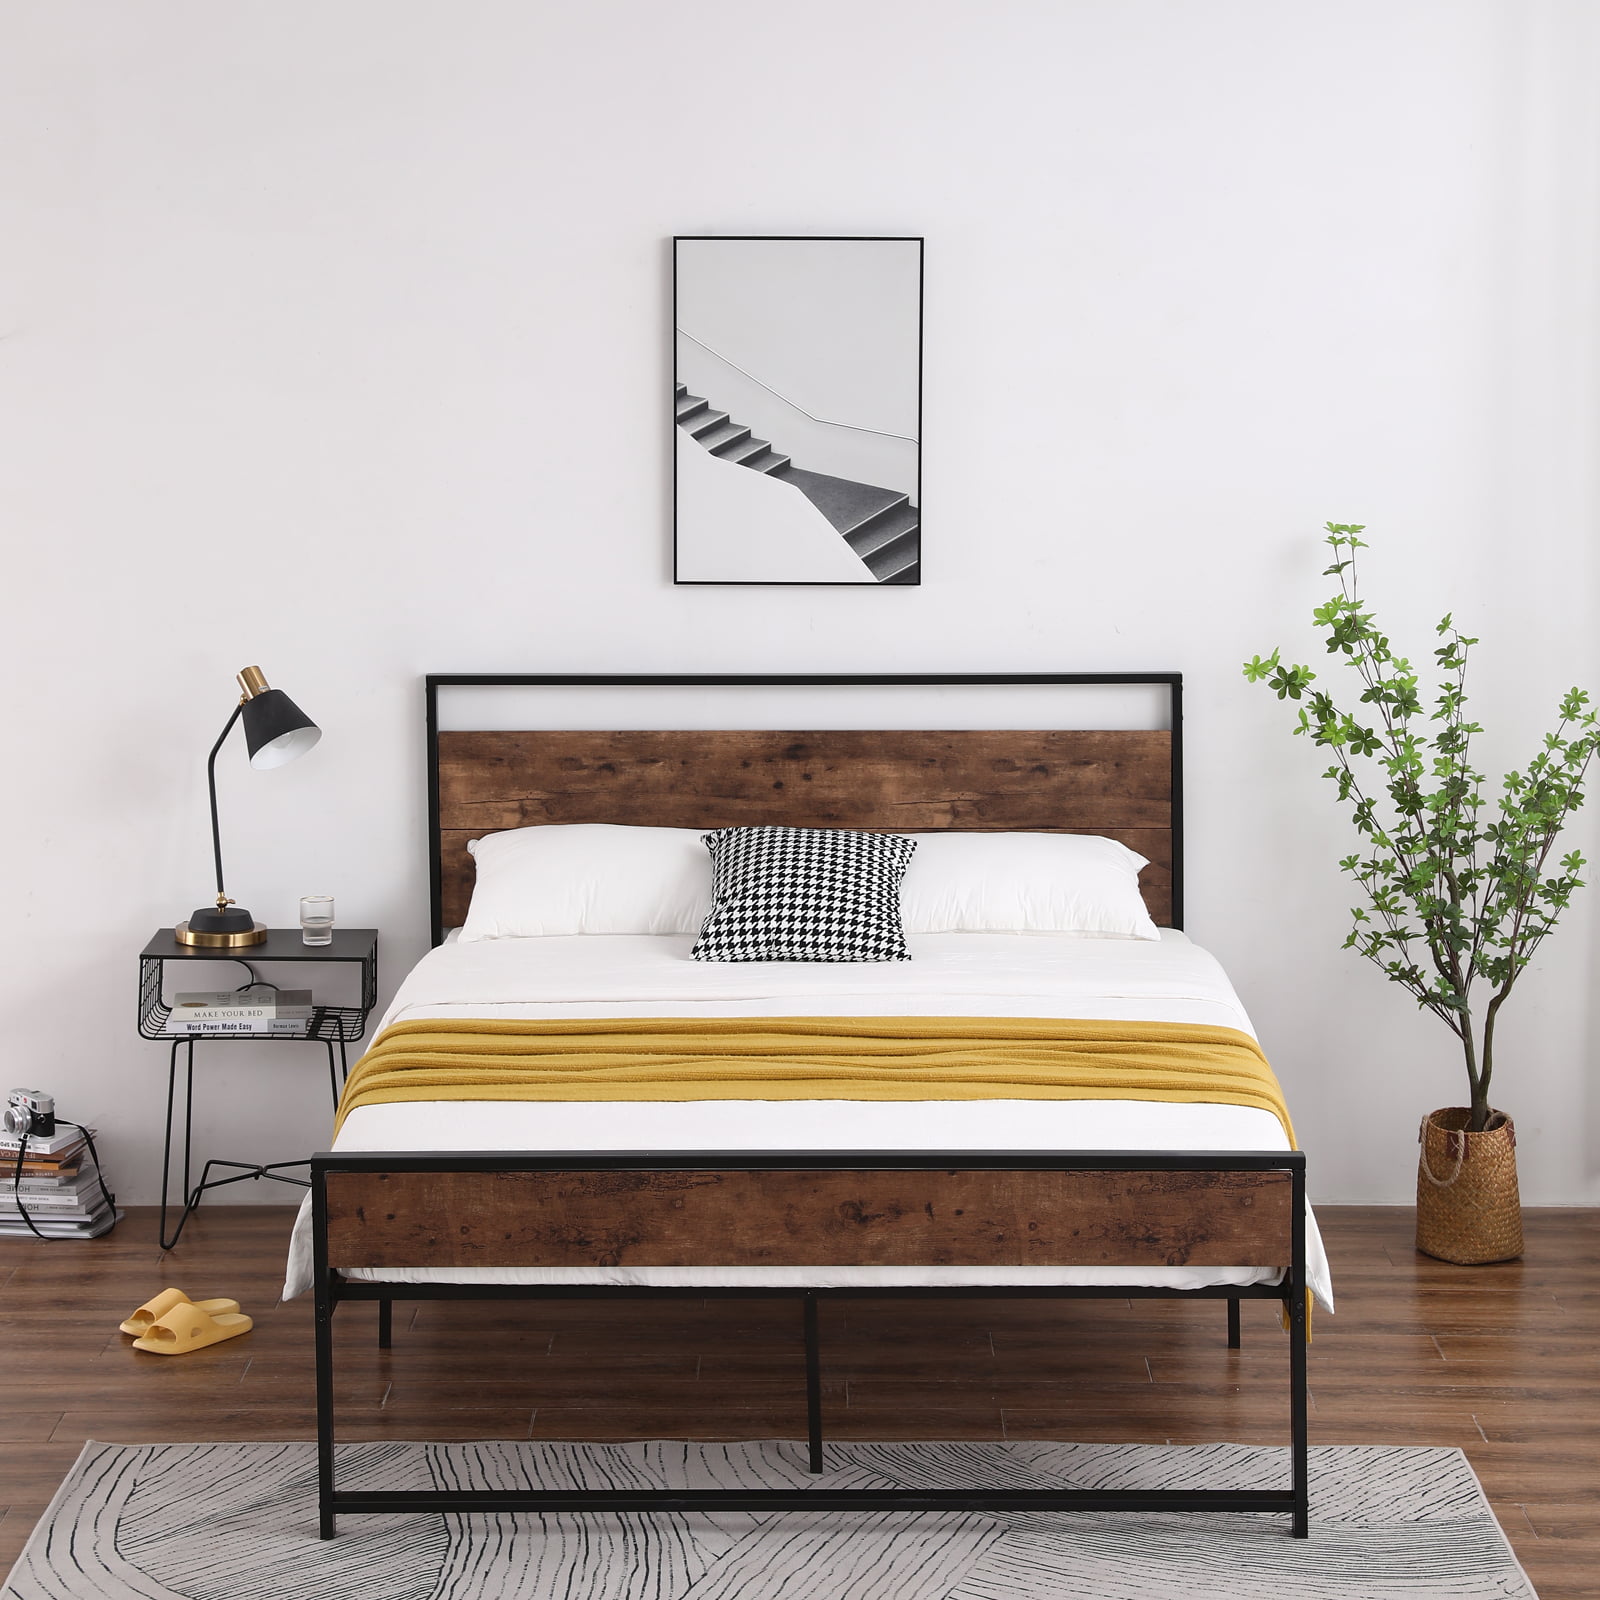 Details about   Queen Full Size Platform Bed Frame Wood Iron Modern Bedroom Set  Twin Headboard 